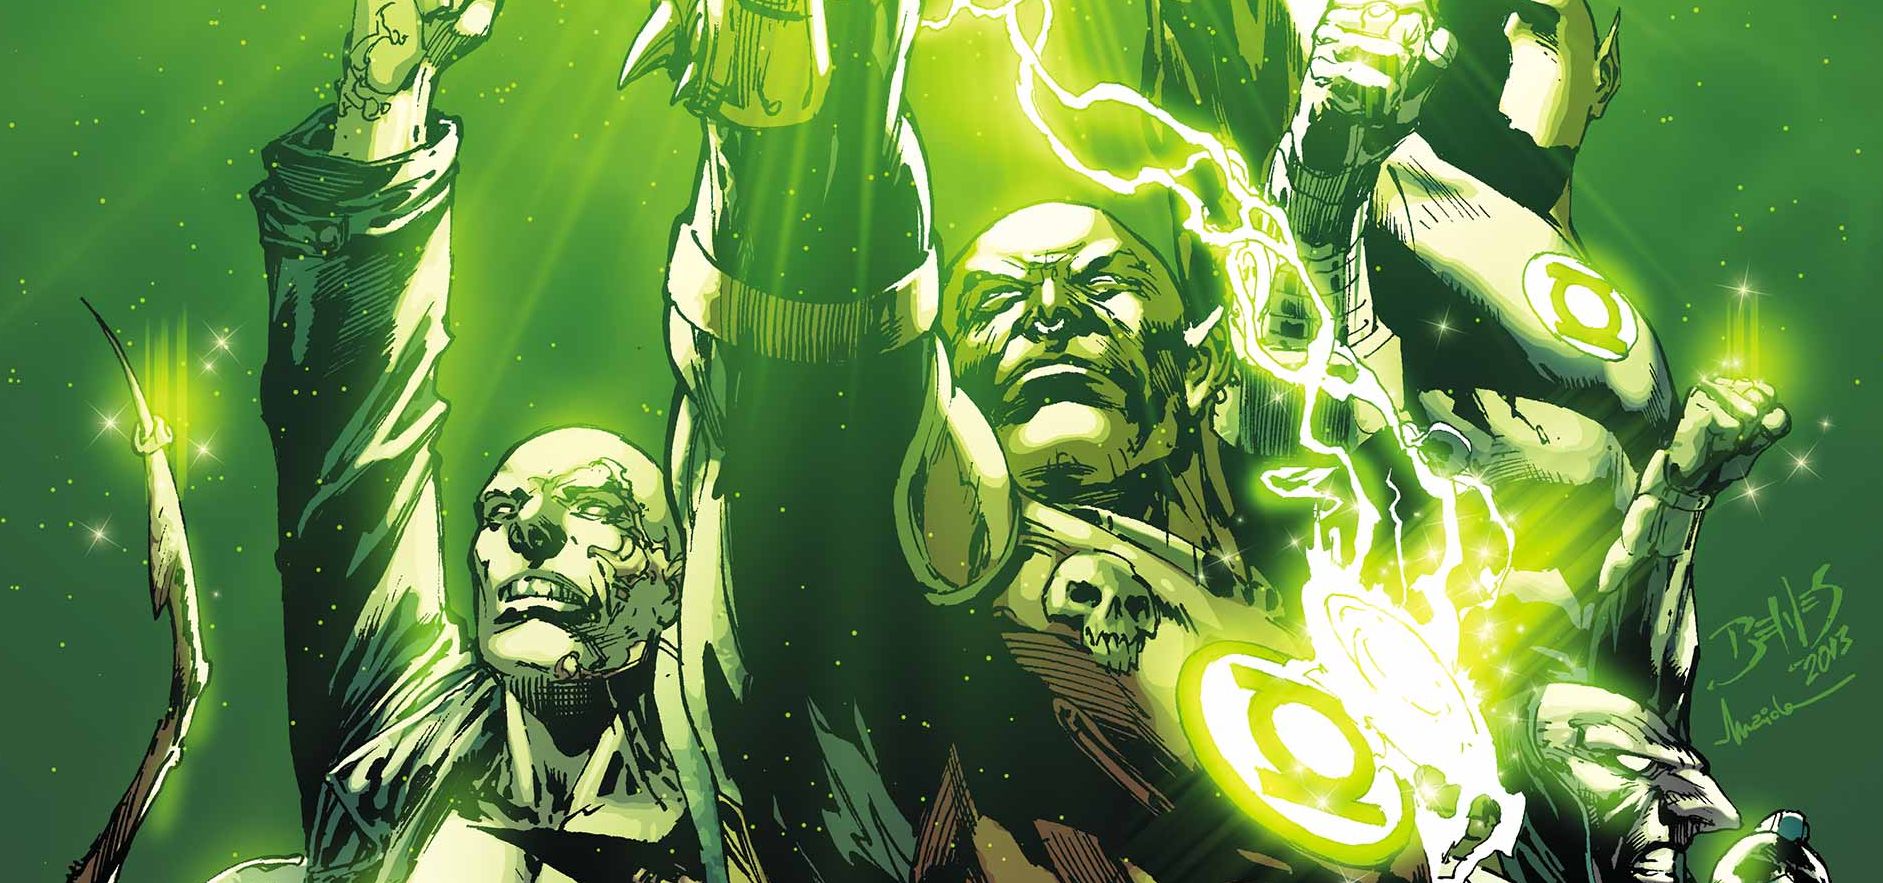 Green Lantern likely not to appear until Justice League 2